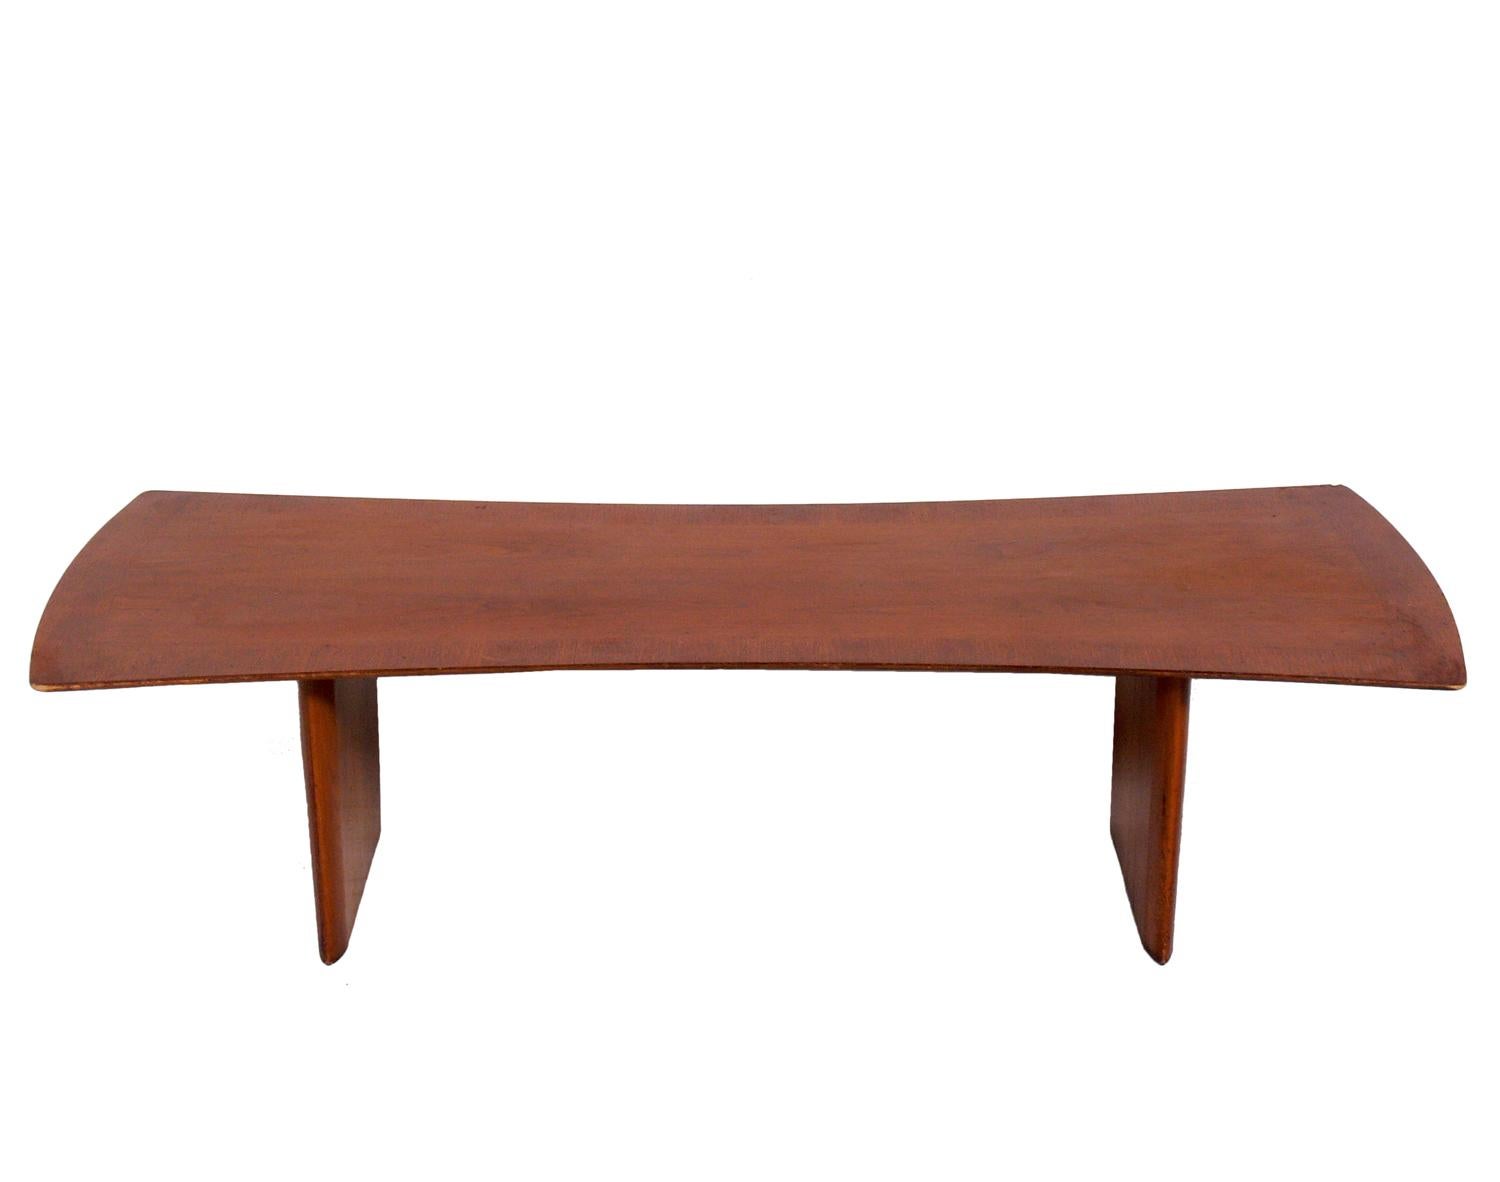 Curvaceous coffee table, designed by T.H. Robsjohn Gibbings for Widdicomb, American, circa 1950s. This piece is currently being refinished and can be completed in your choice of color. The price noted includes refinishing.